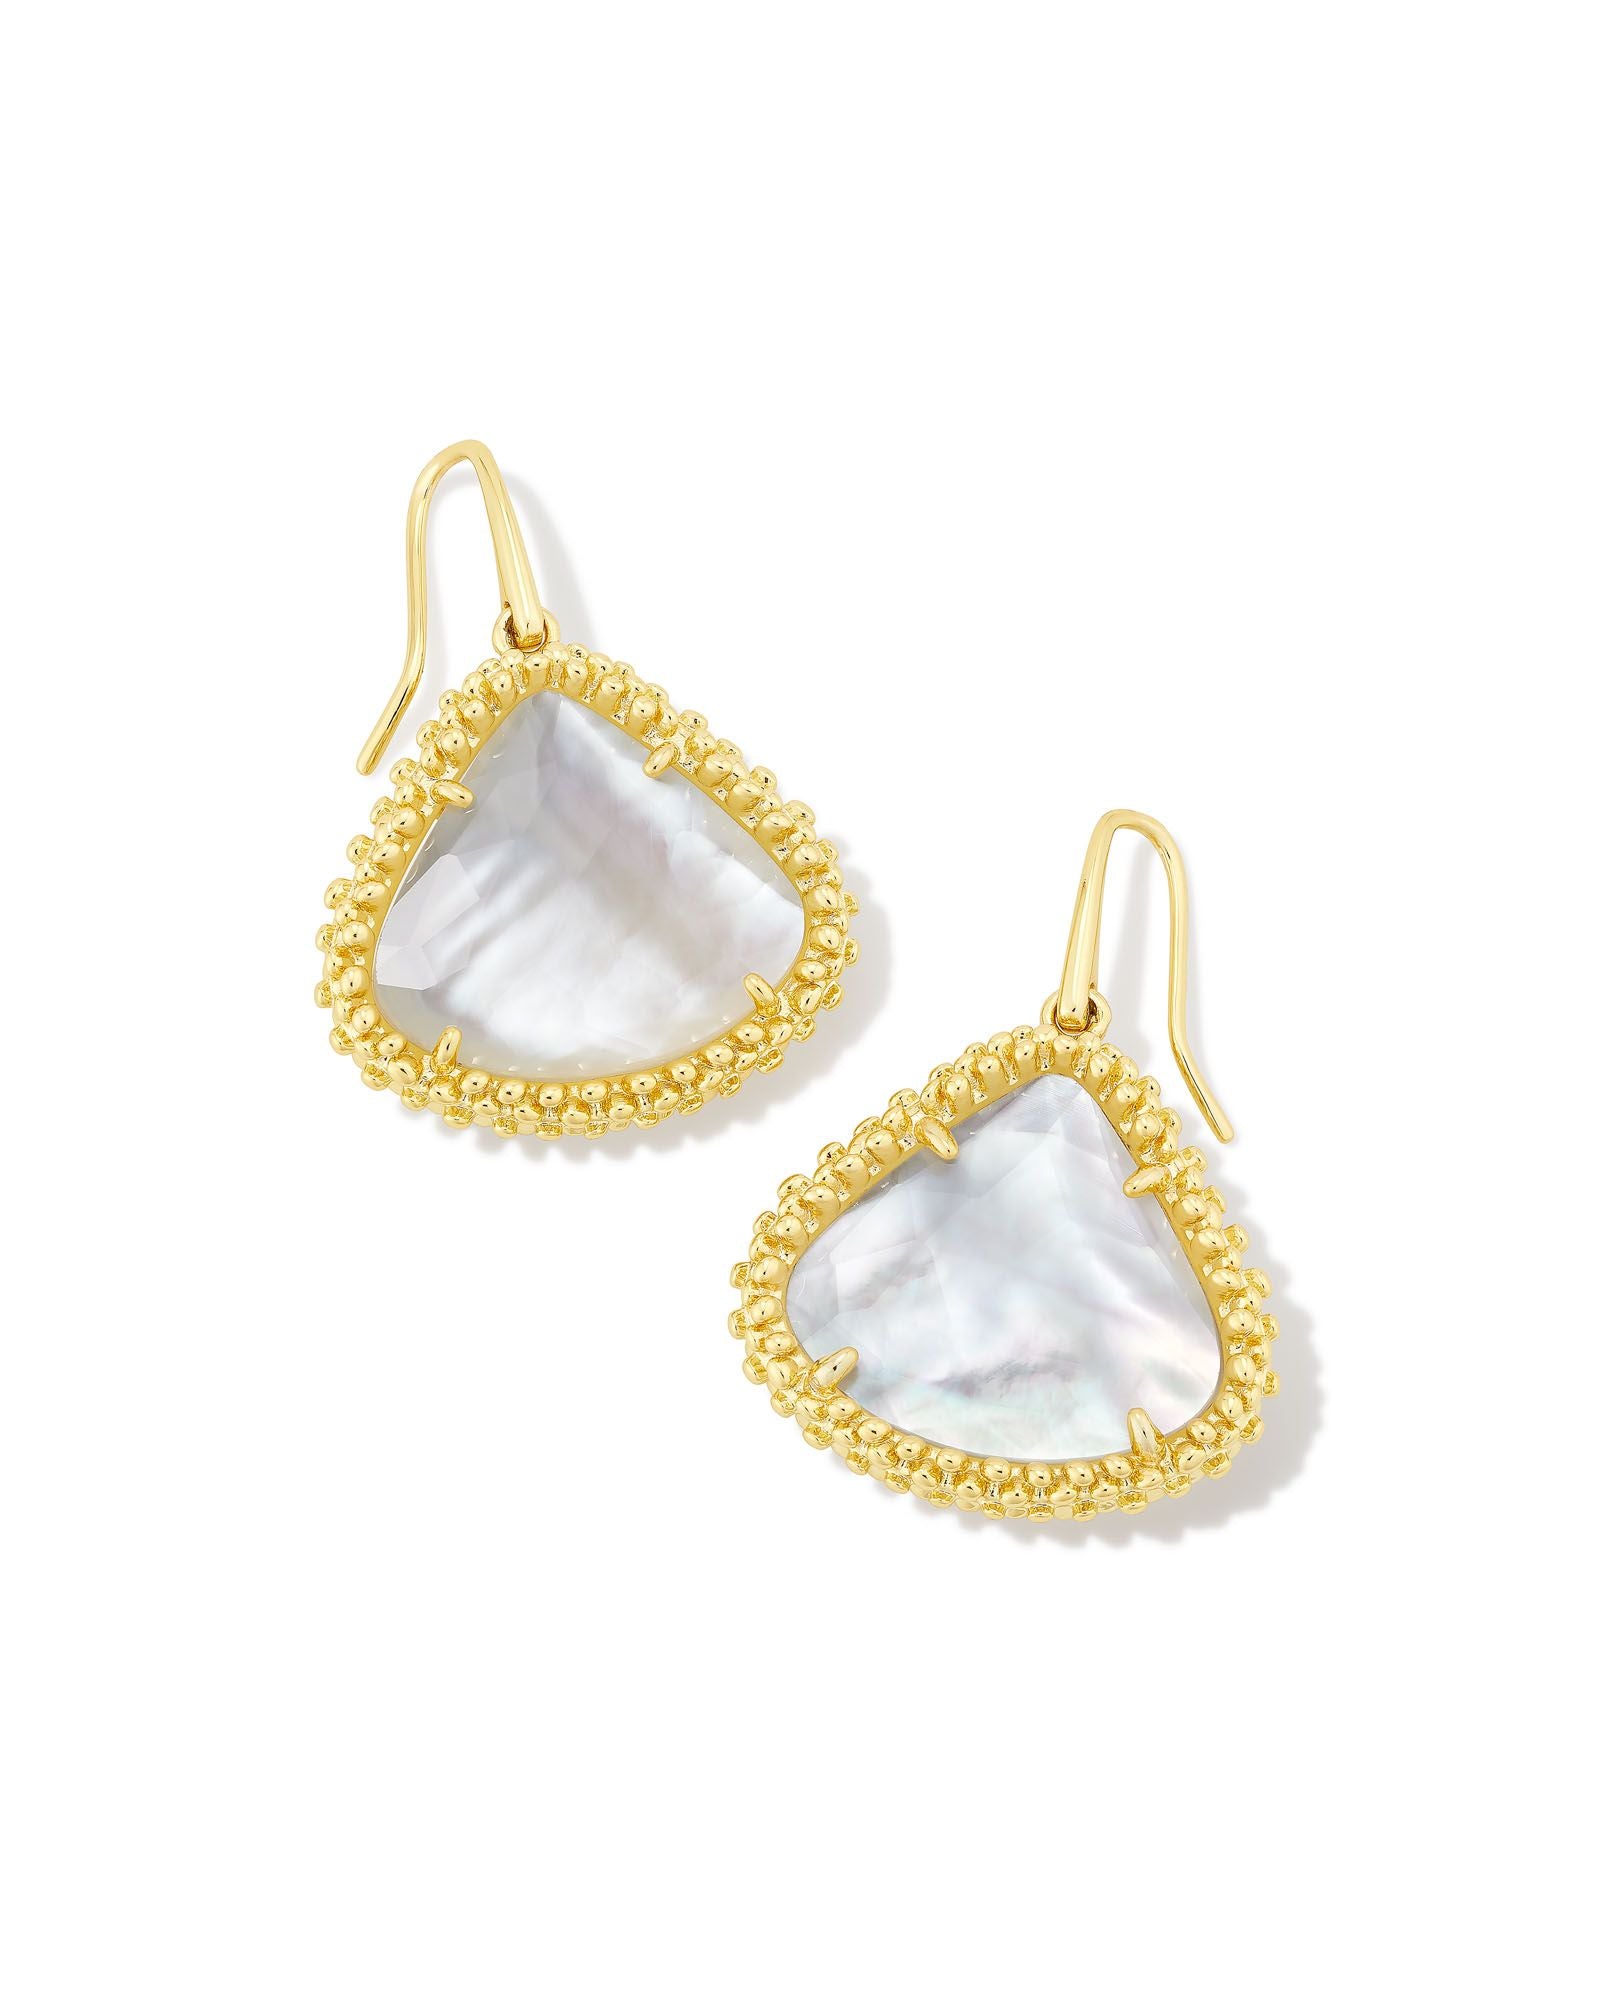 Framed Kendall Large Drop Earring in Gold Ivory Mother of Pearl